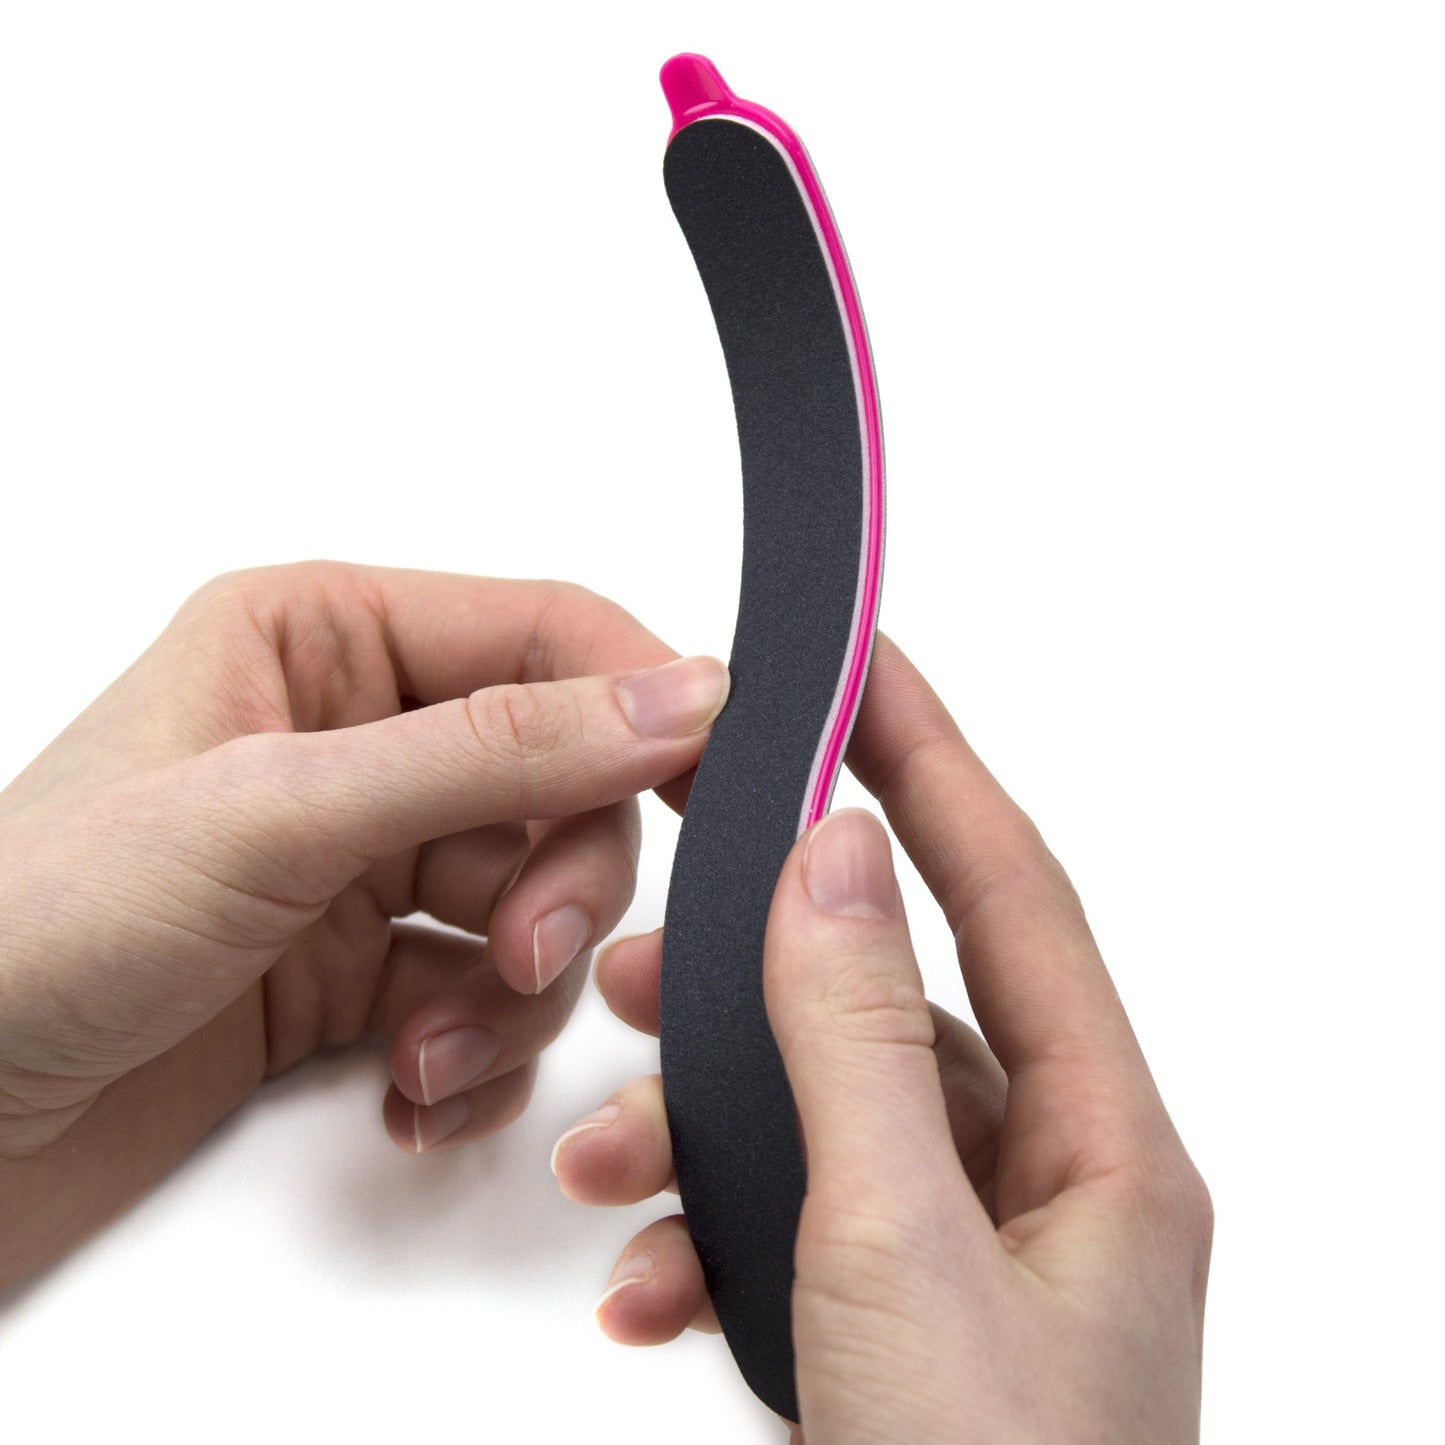 STYLFILE Curved 3 in 1 S-Shape Nail File